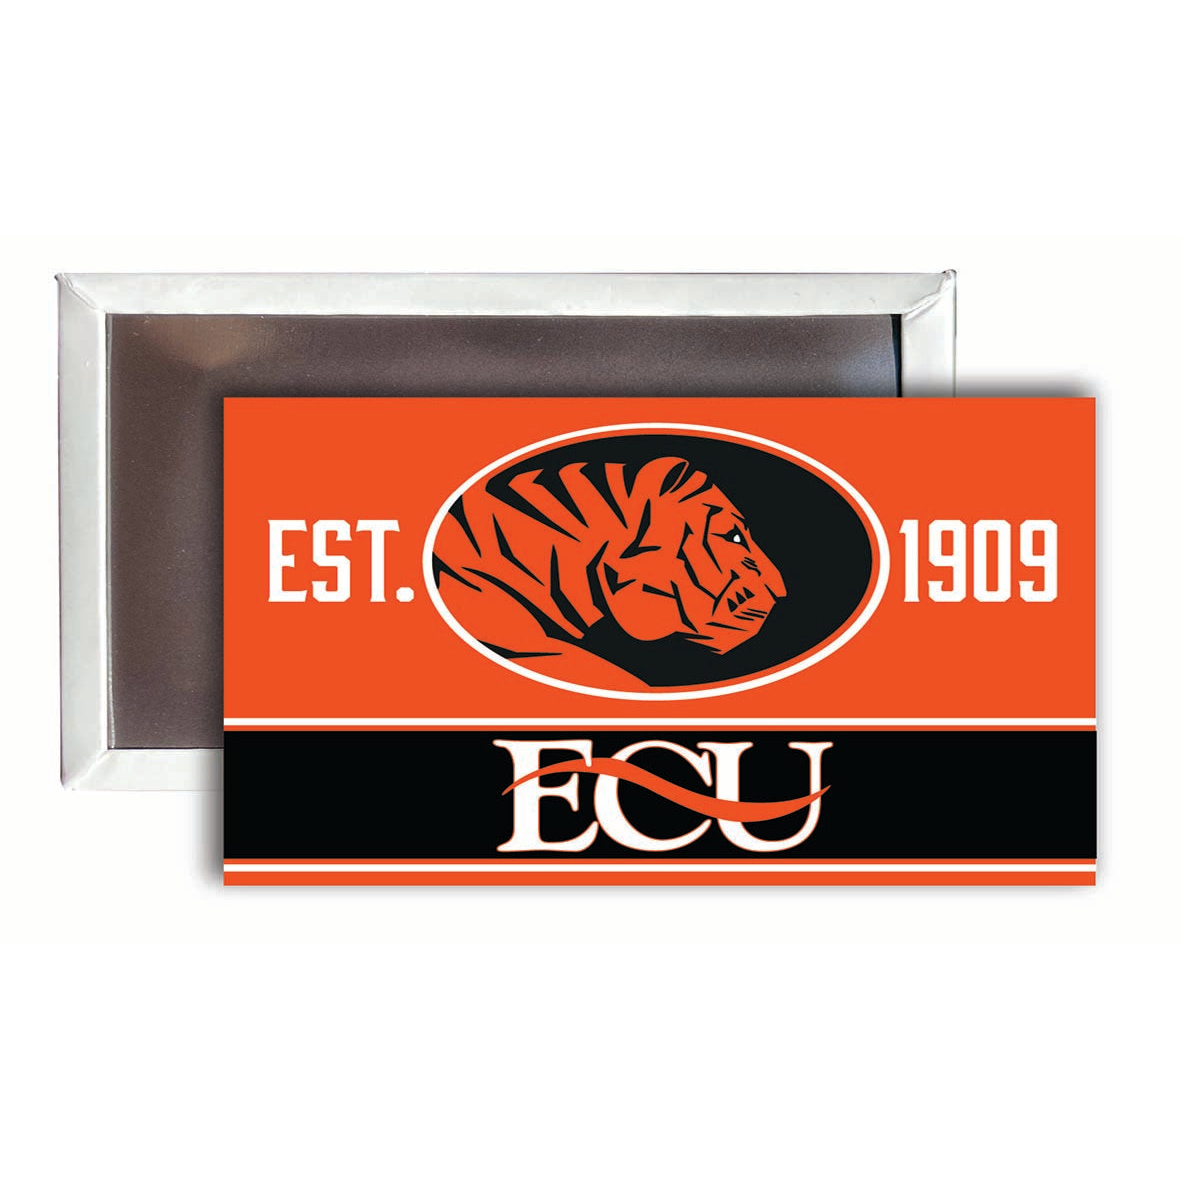 East Central University Tigers 2x3-Inch Fridge Magnet 4-Pack